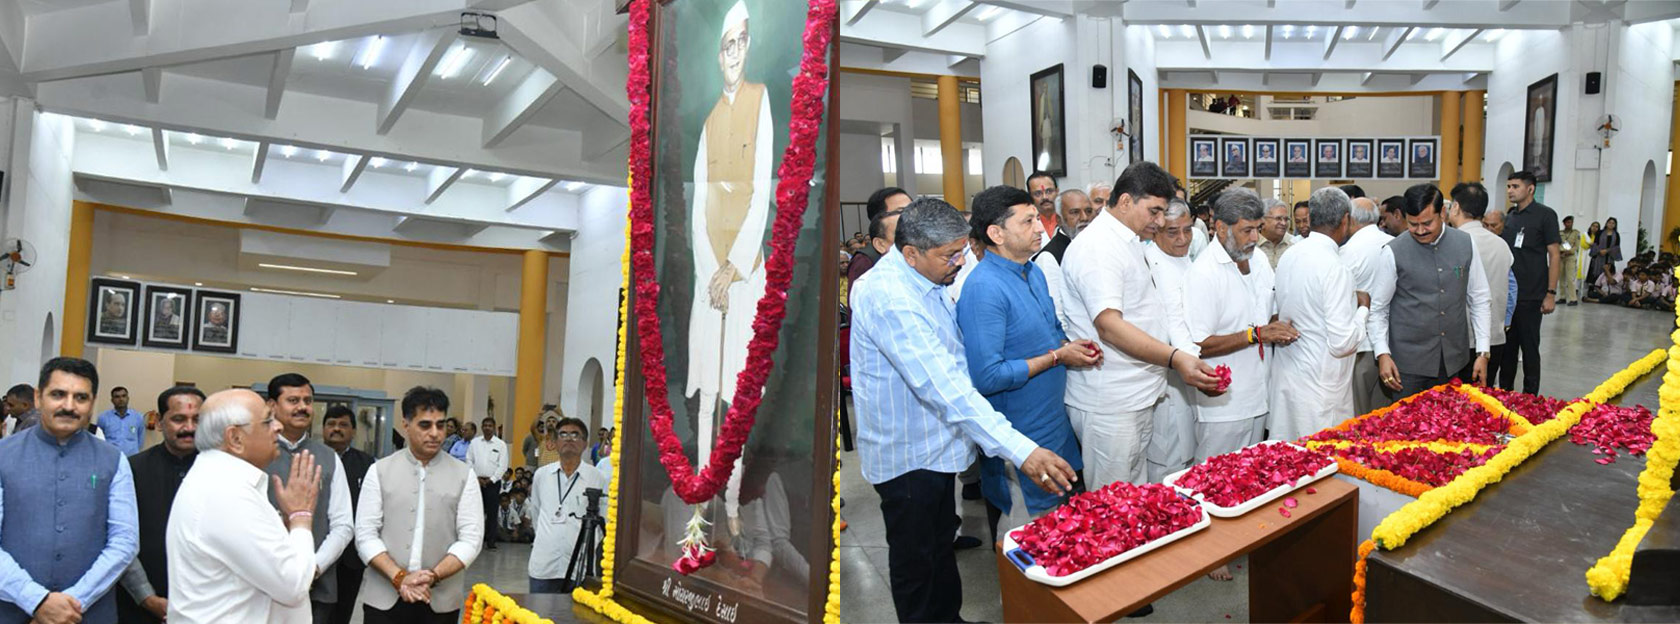 Chief Minister Paid Floral Tributes To Late PM Shri Morarji Desai On His 129th Birth Anniversary At The State Assembly